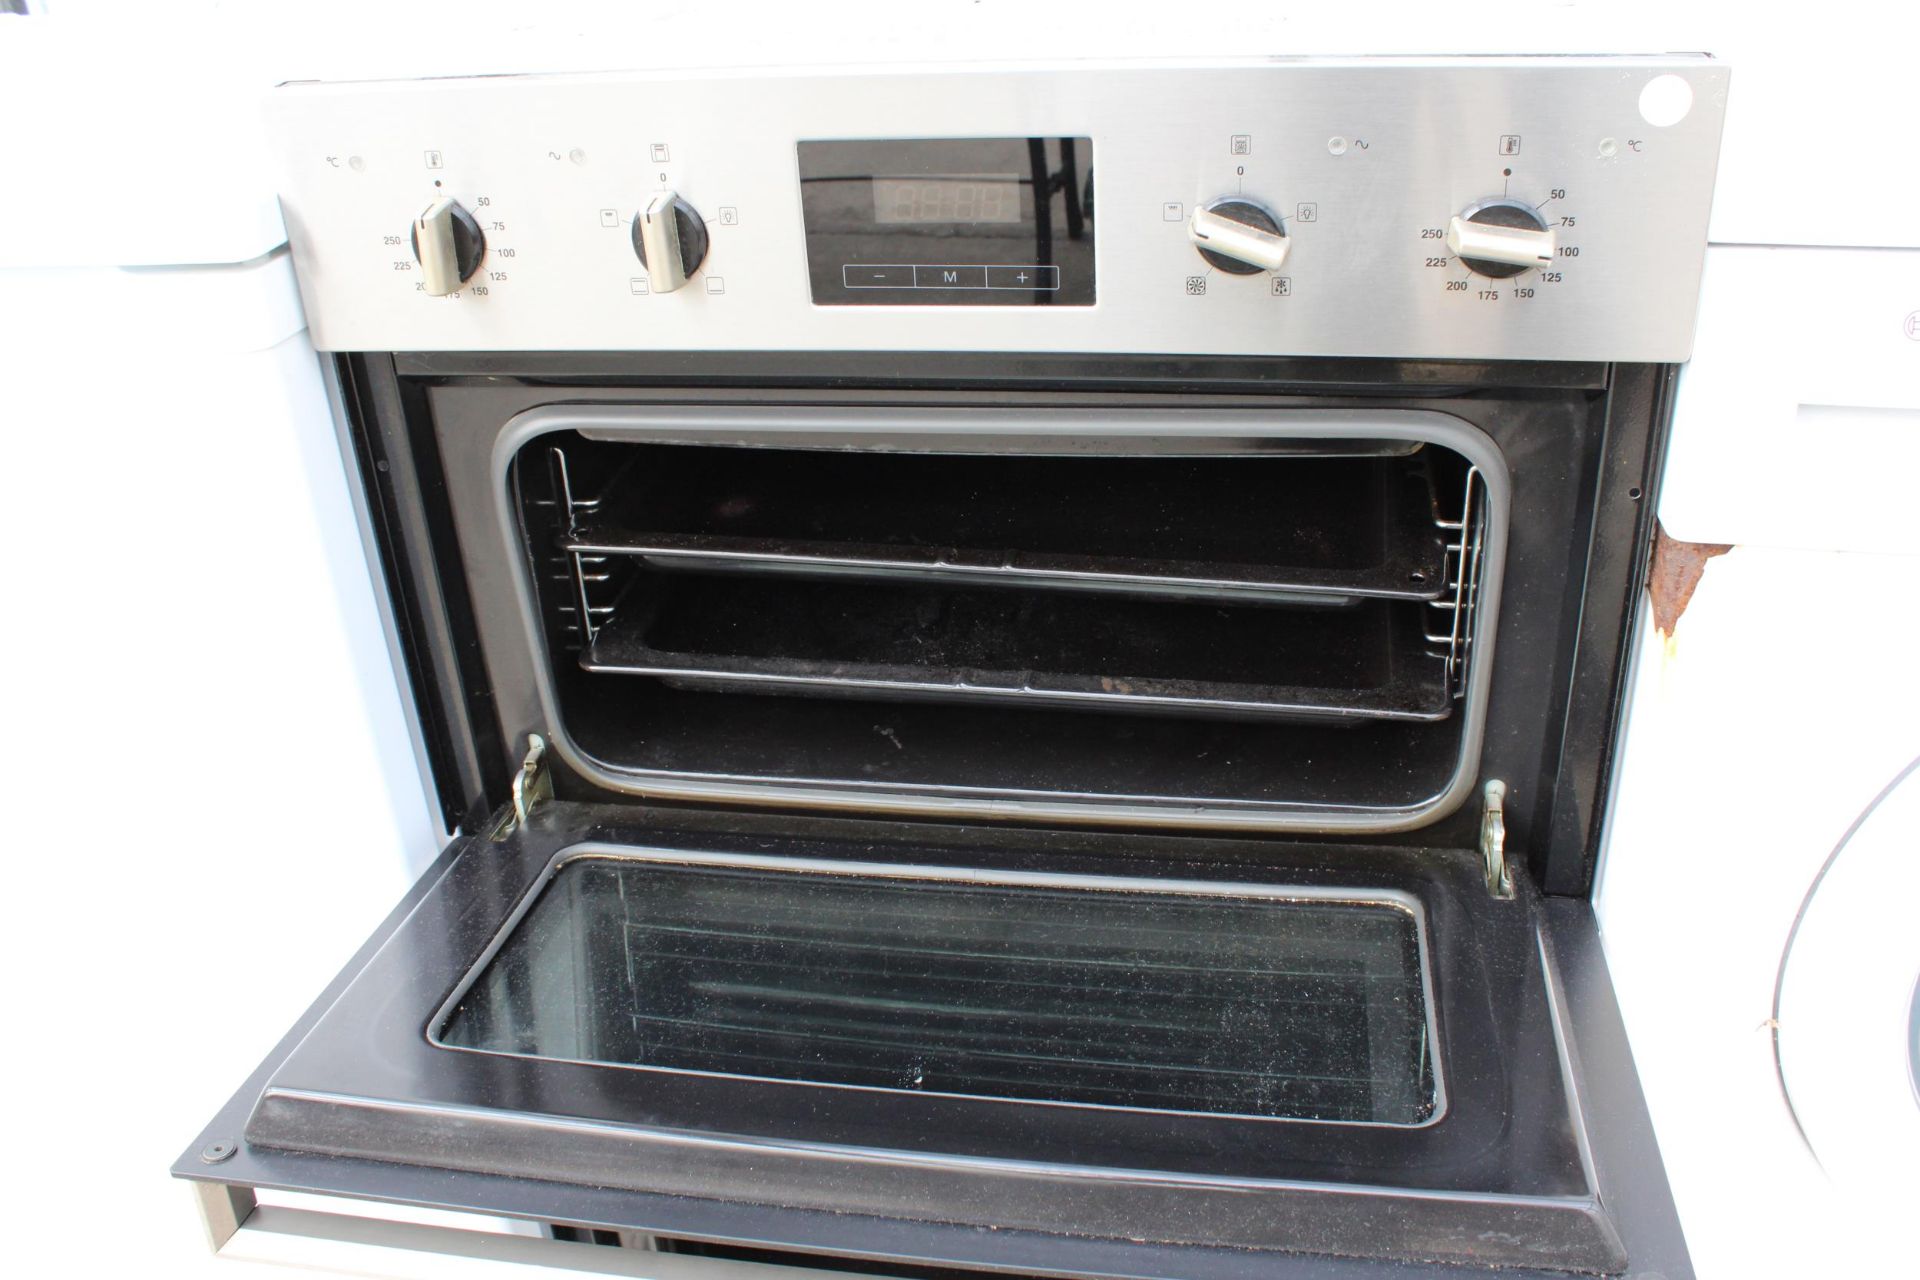 A CHROME AND BLACK BAUMATIC INTERGRATED DOUBLE OVEN - Image 2 of 3